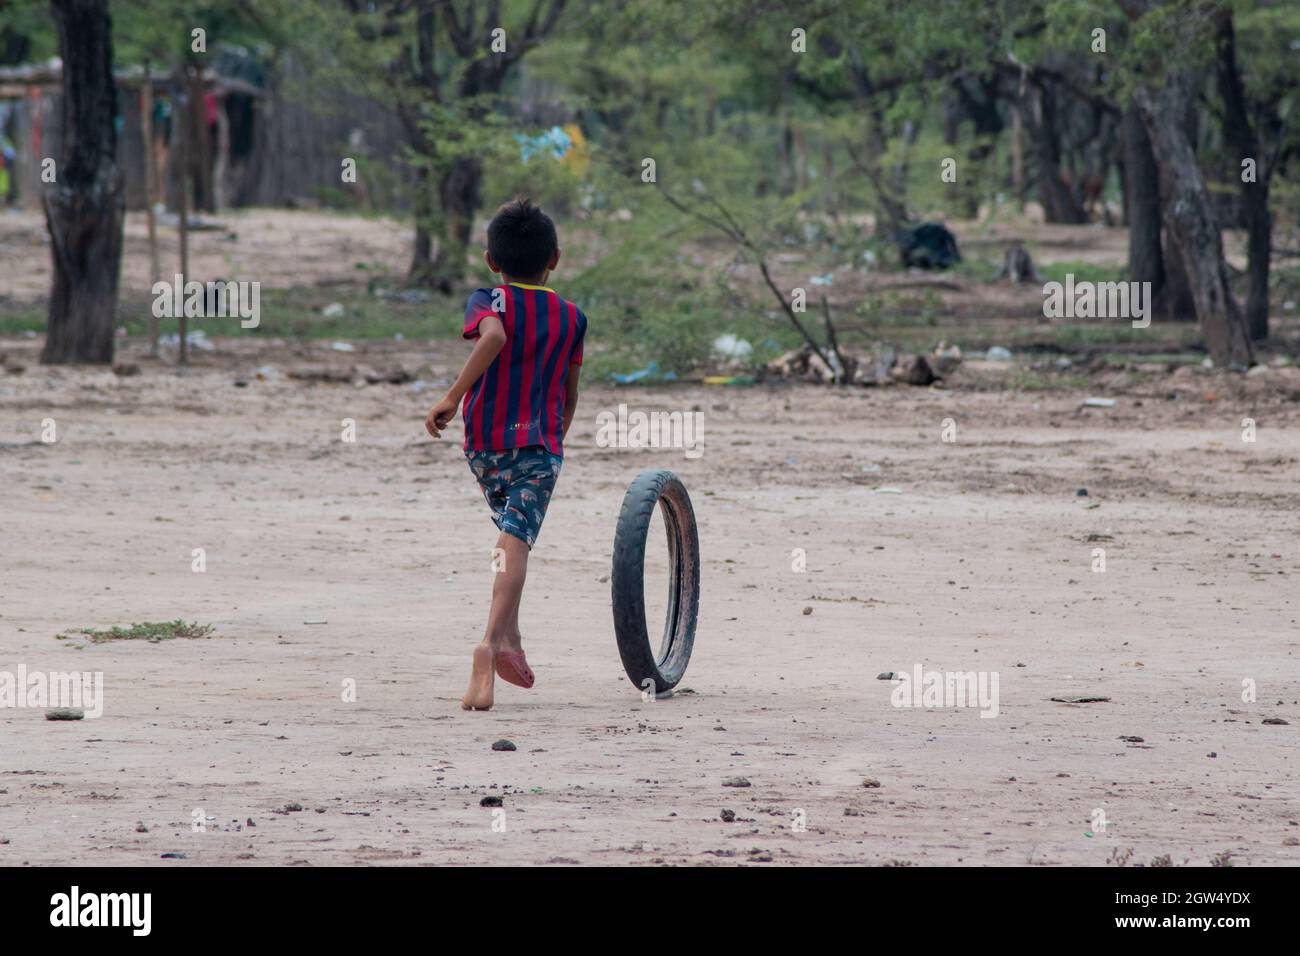 A Wayuu indigenous community child plays with a tire thrown to the garbage during a Humanitarian Mission developed by 'De Corazon Guajira' in Mayapo at La Guajira - Colombia were they visited the Wayuu indigenous communities 'Pactalia, Poromana, Perrohuila' on September 26, 2021. The Guajira region in Colombia is the poorest region in Colombia, with its people commongly living without drinkable water, electricity and food. Stock Photo